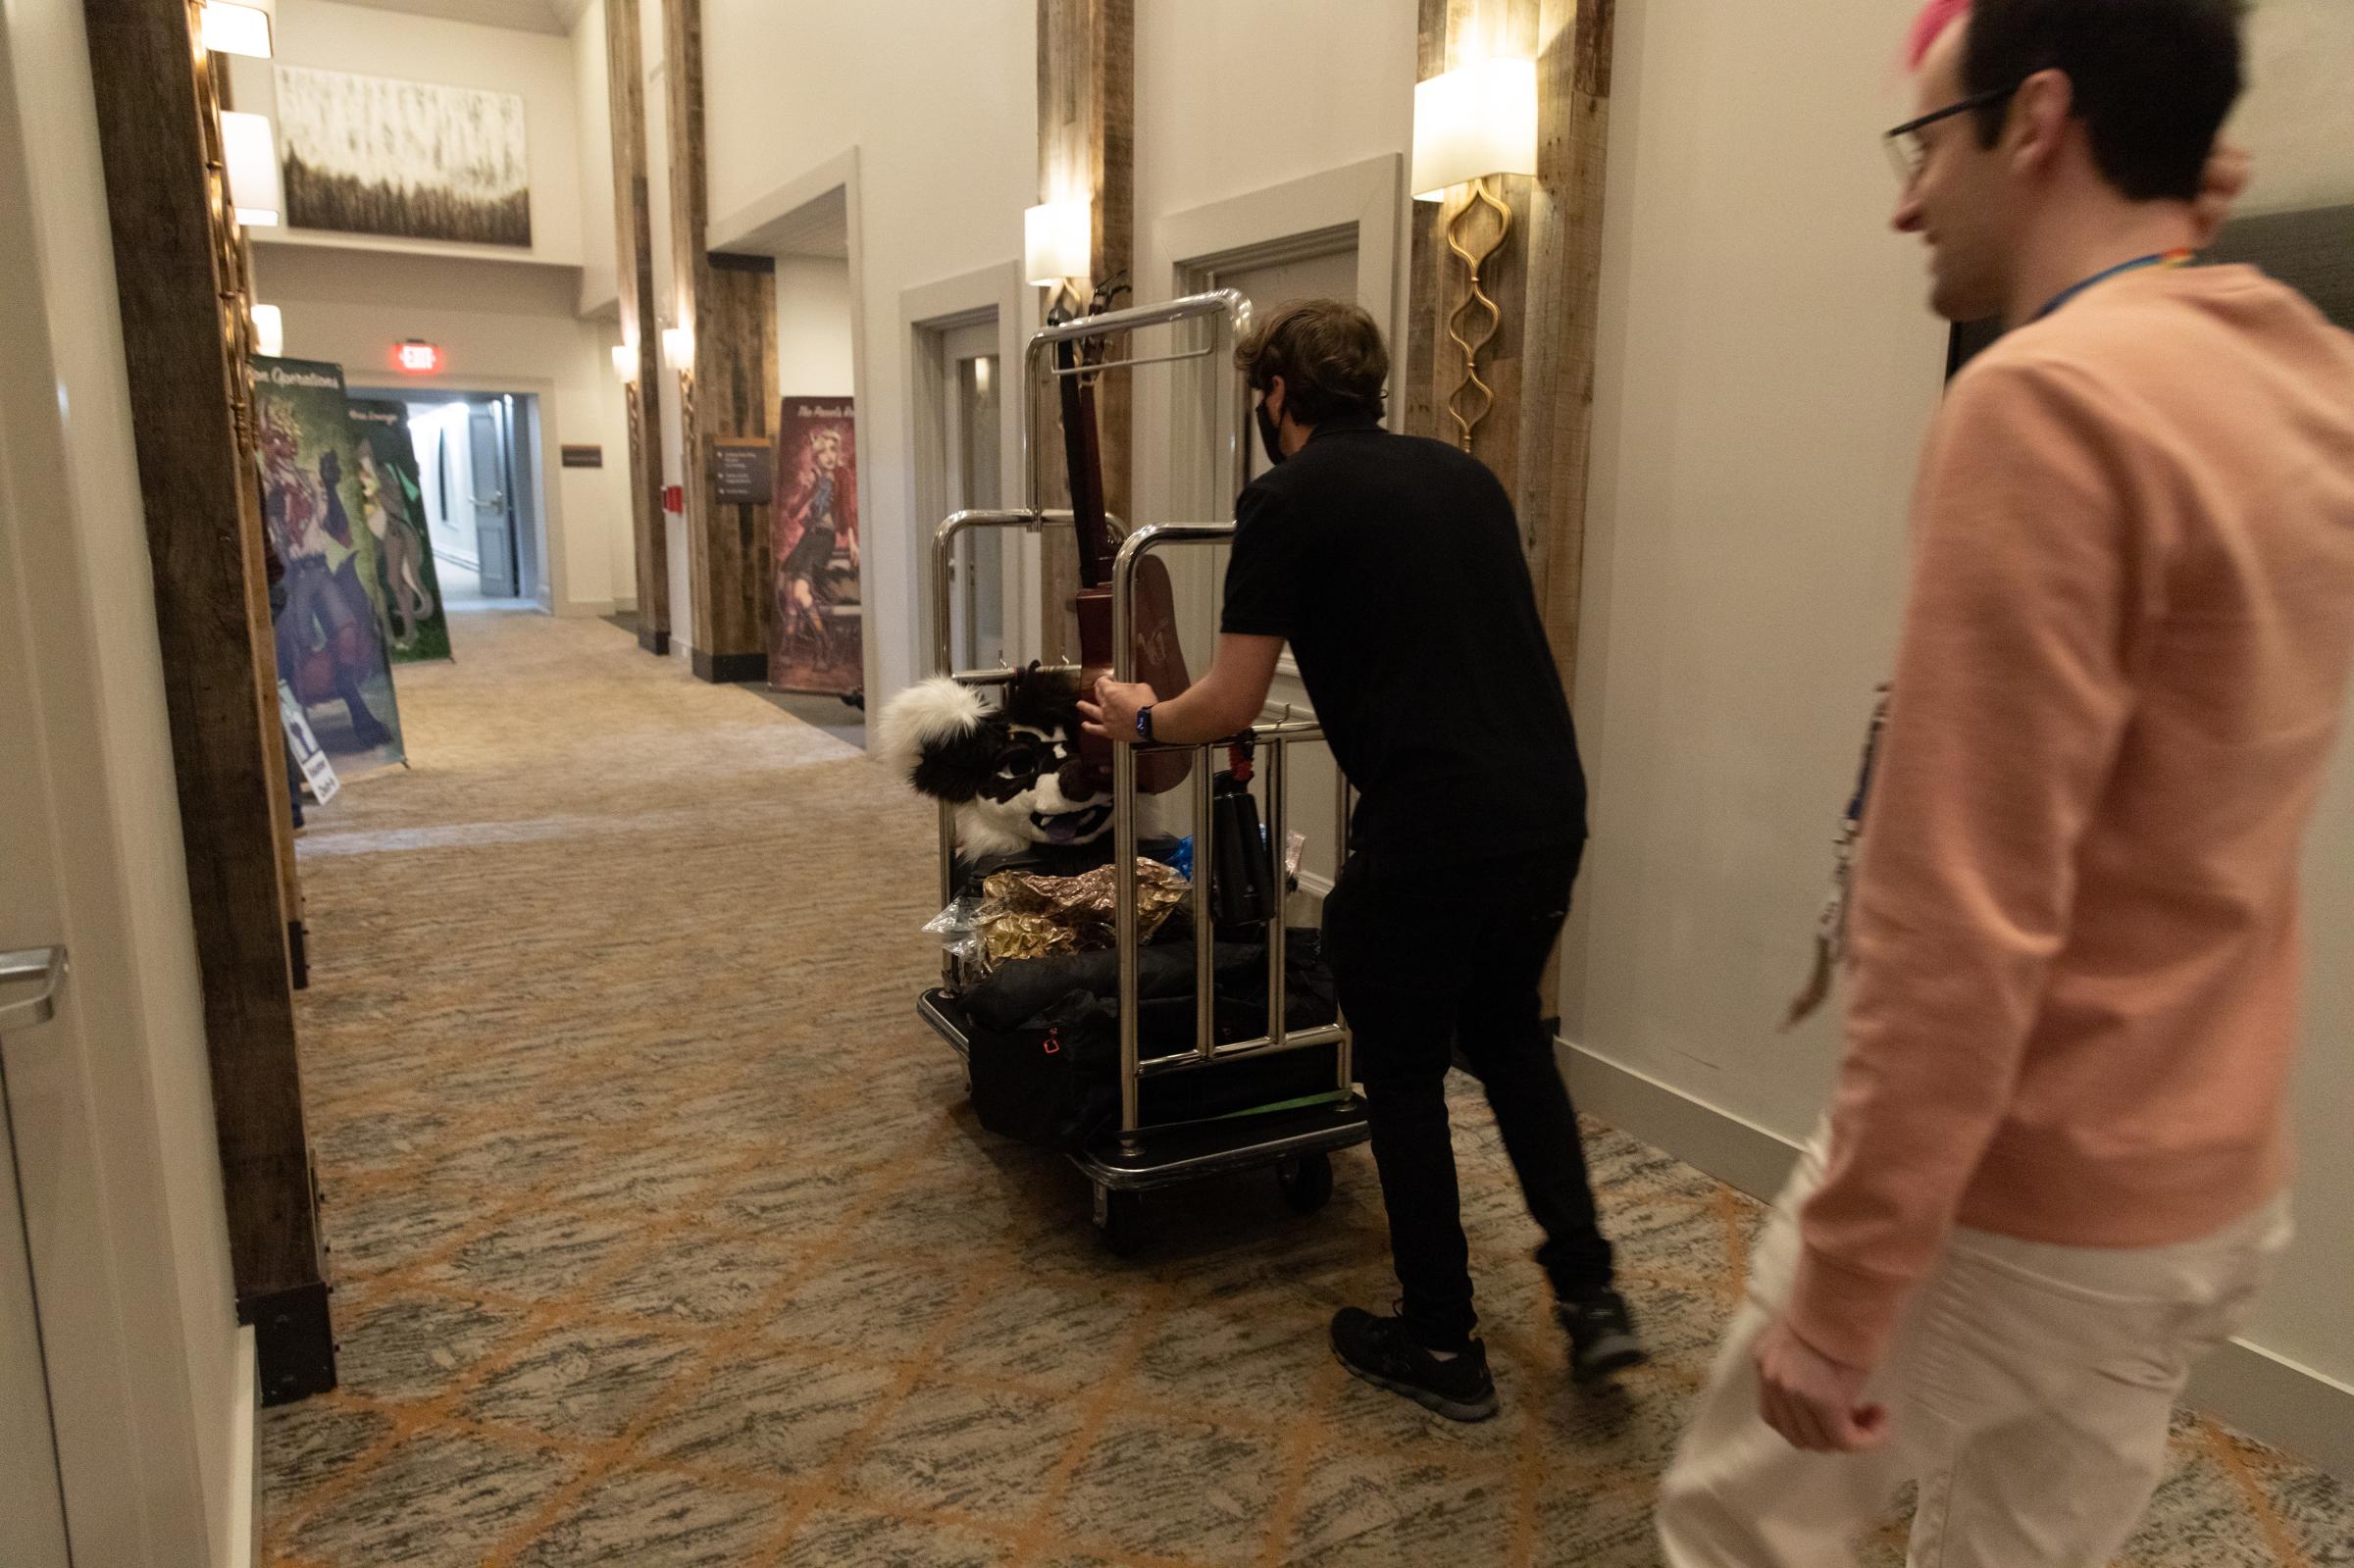 Furry Fandom - Attendees check in to the hotel with fursuits in tow.